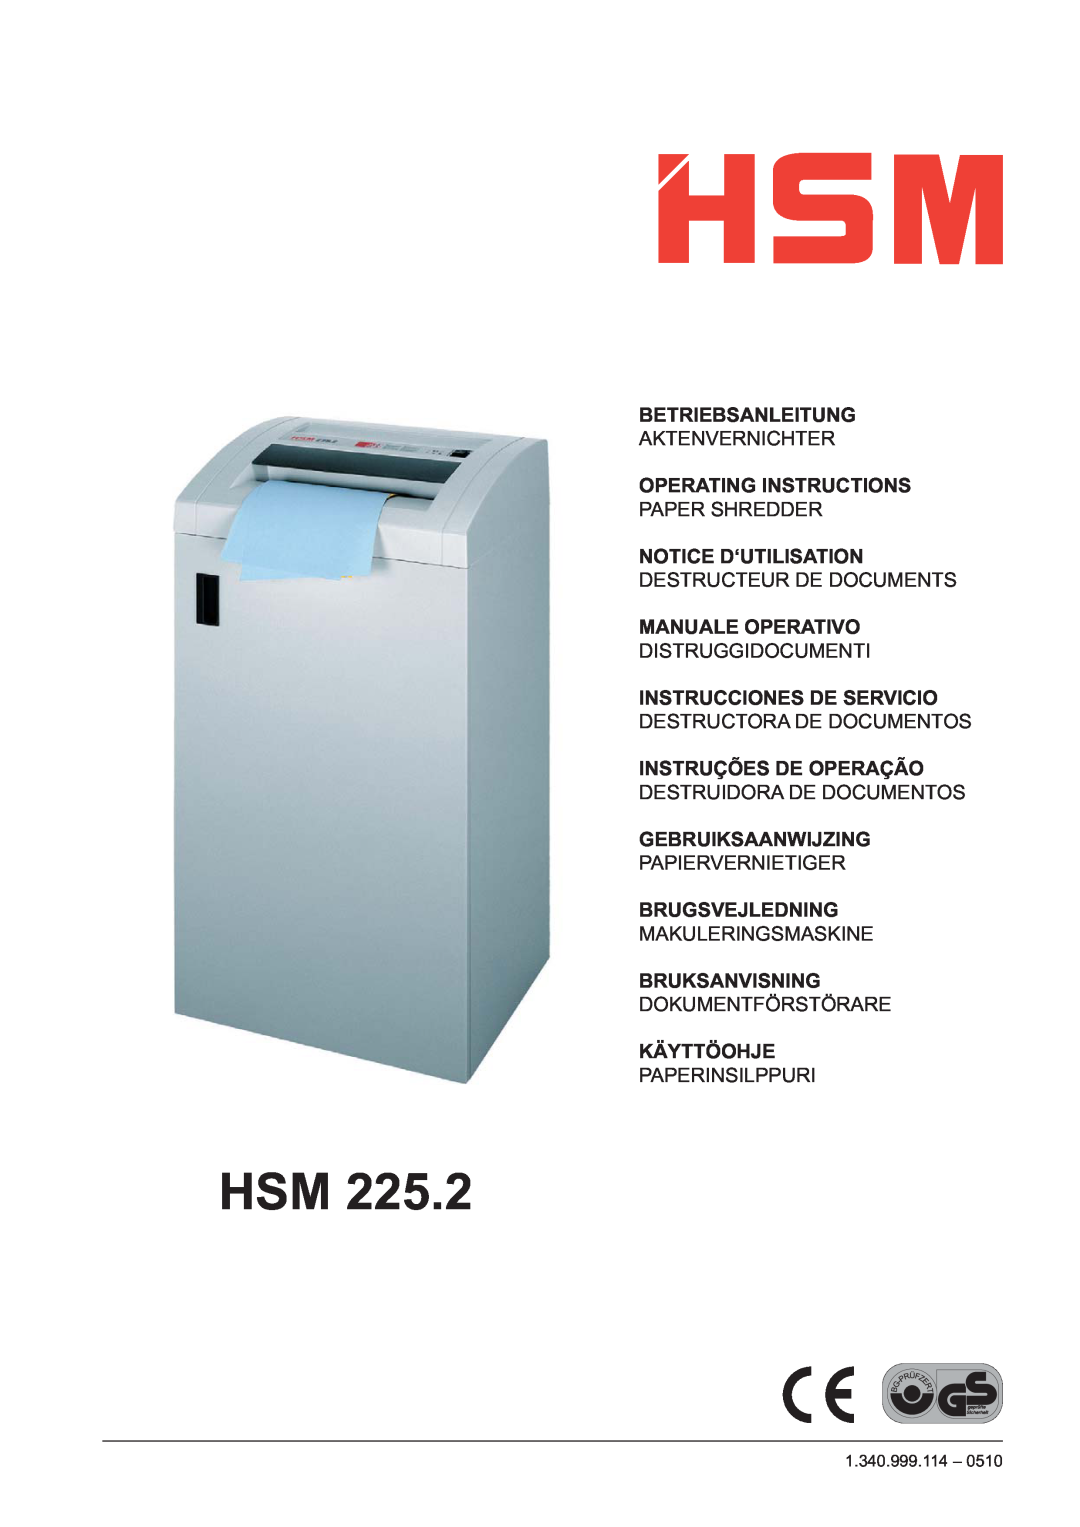 HSM 225.2 operating instructions 